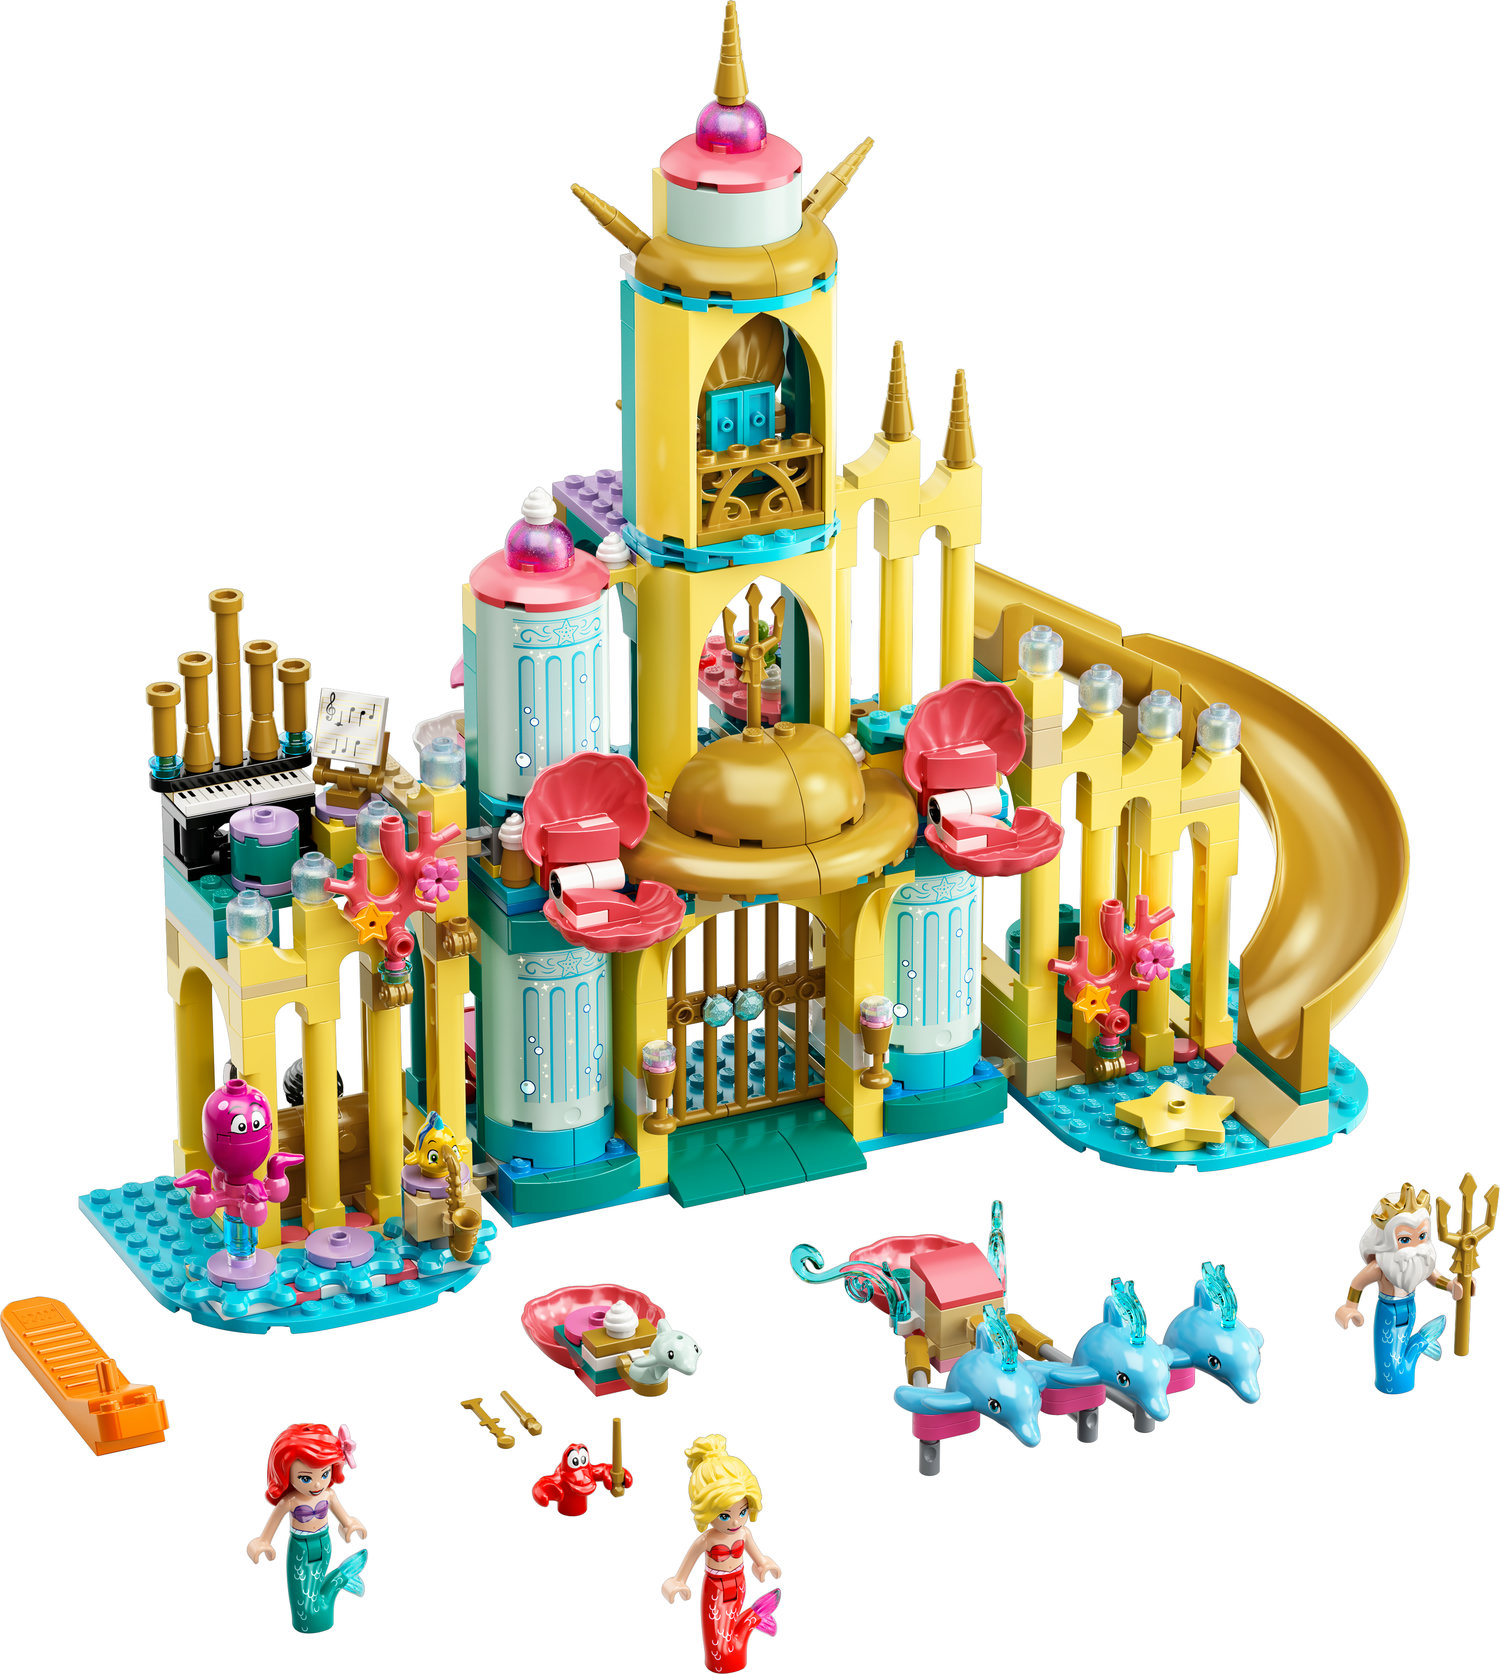 LEGO Disney Princess Ariel’s Underwater Palace 43207, Buildable Princess Castle Toy, Disney Gift Idea for Kids, Girls and Boys Aged 6+ with The Little Mermaid Mini-Doll Figure & Dolphin Figures - image 5 of 10